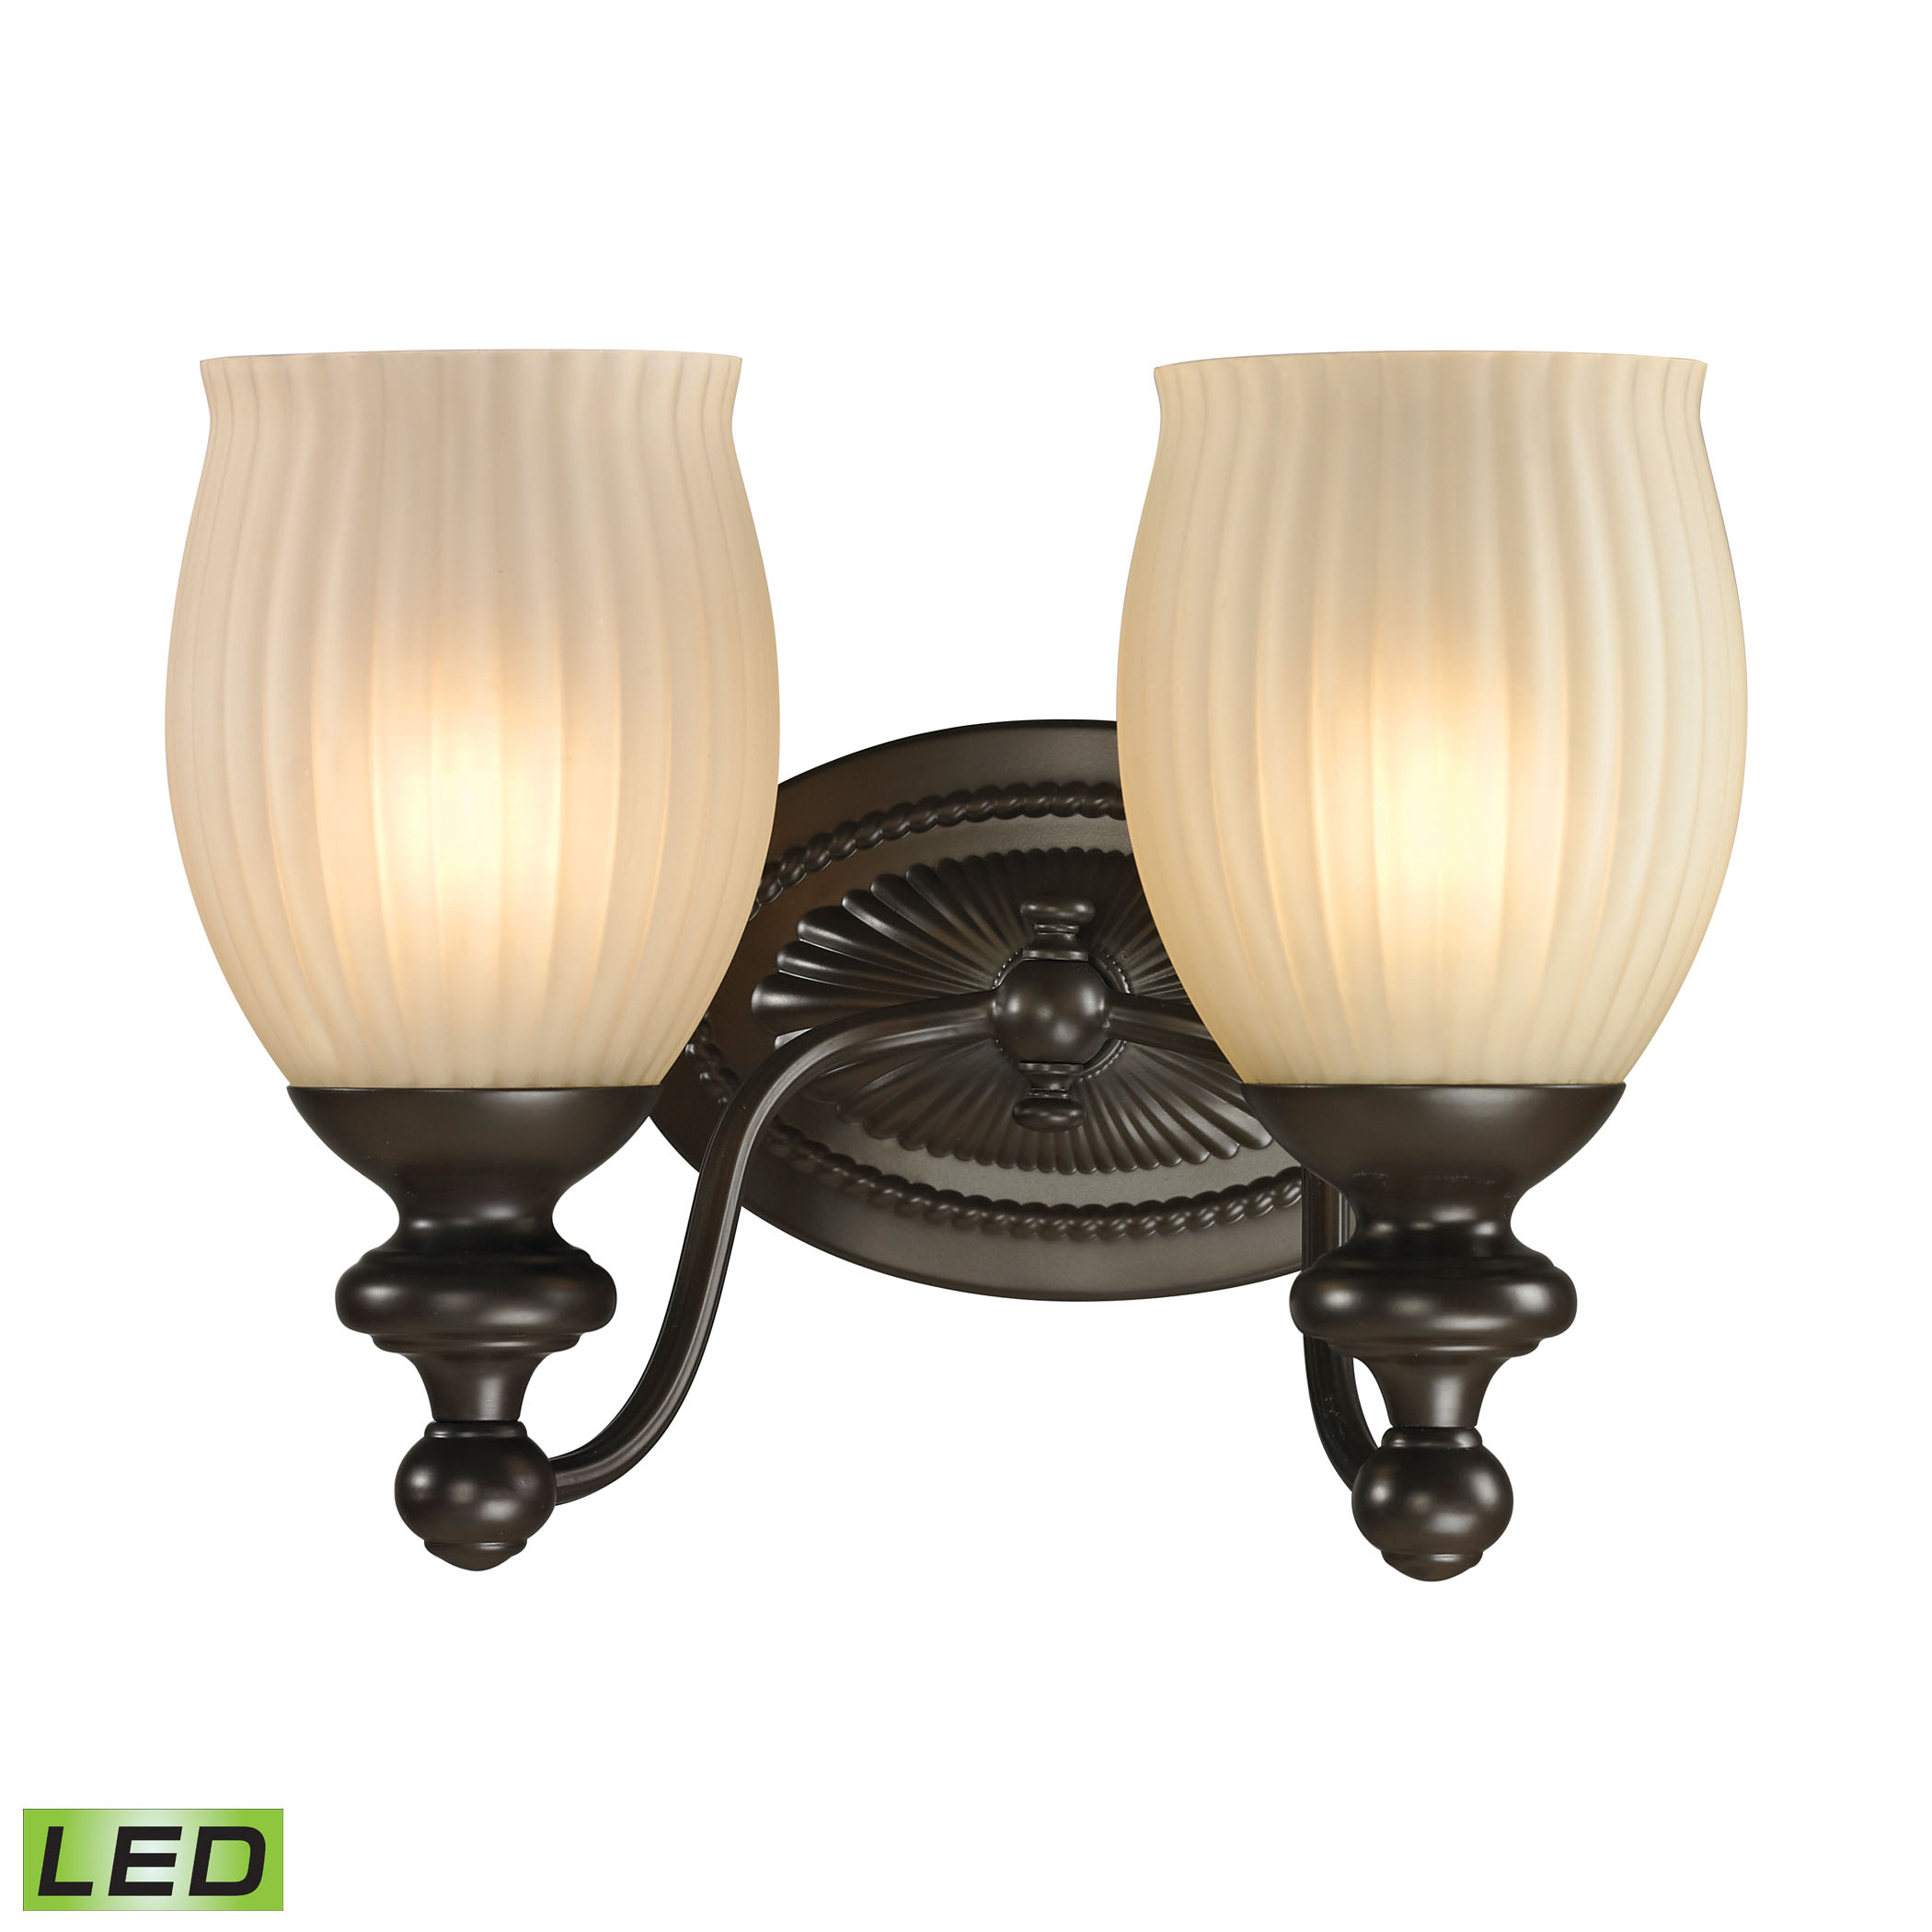 Park Ridge Collection 2 Light Bath in Oil Rubbed Bronze - LED, 800 Lumens (1600 Lumens Total) With